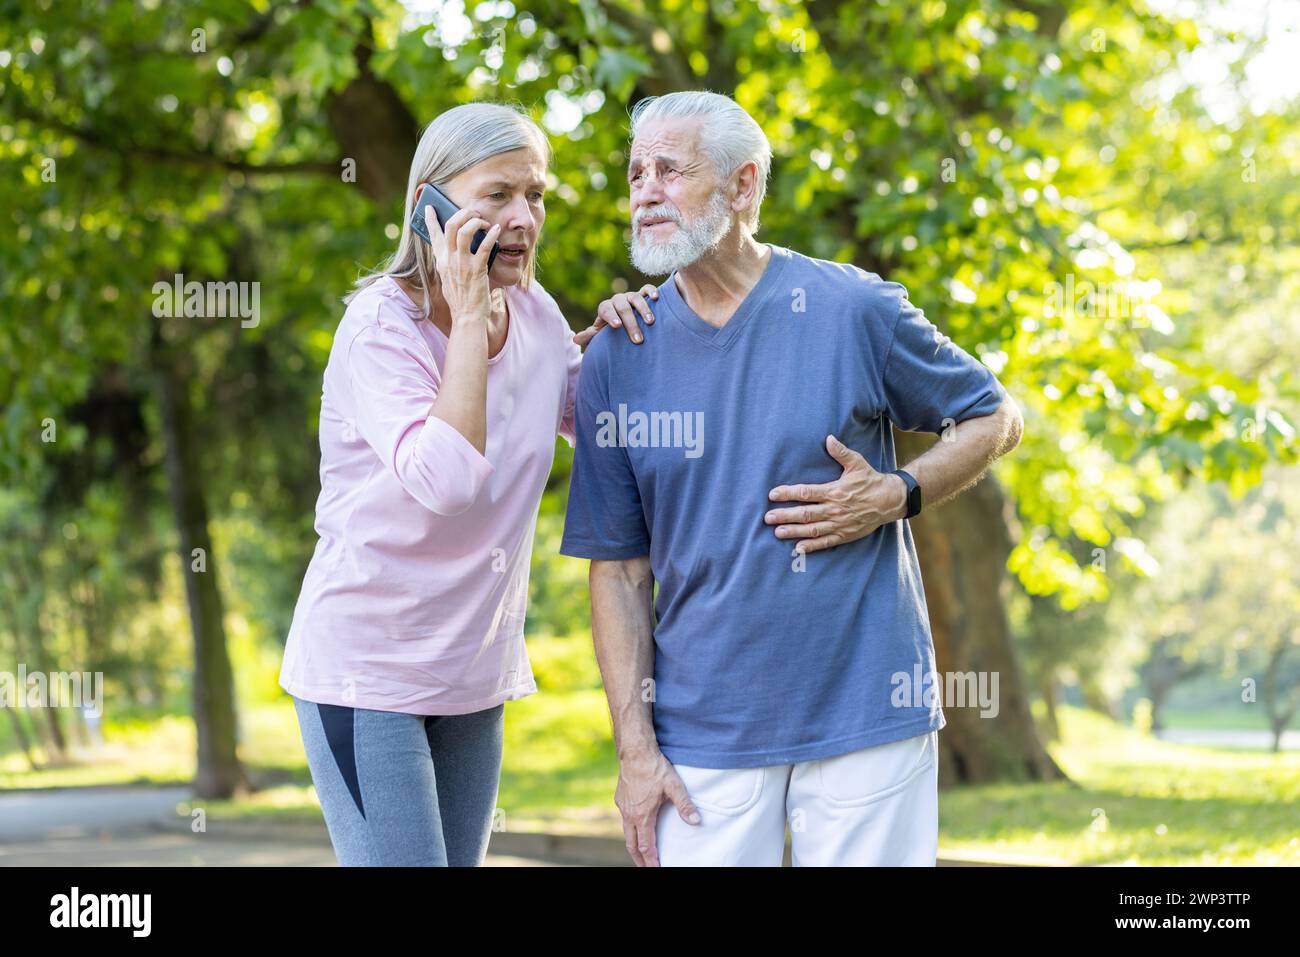 An elderly couple walks in the park, a gray-faced man stands and holds his hand to his chest, feels pain in his heart, a woman supports him and calls for emergency help. Stock Photo